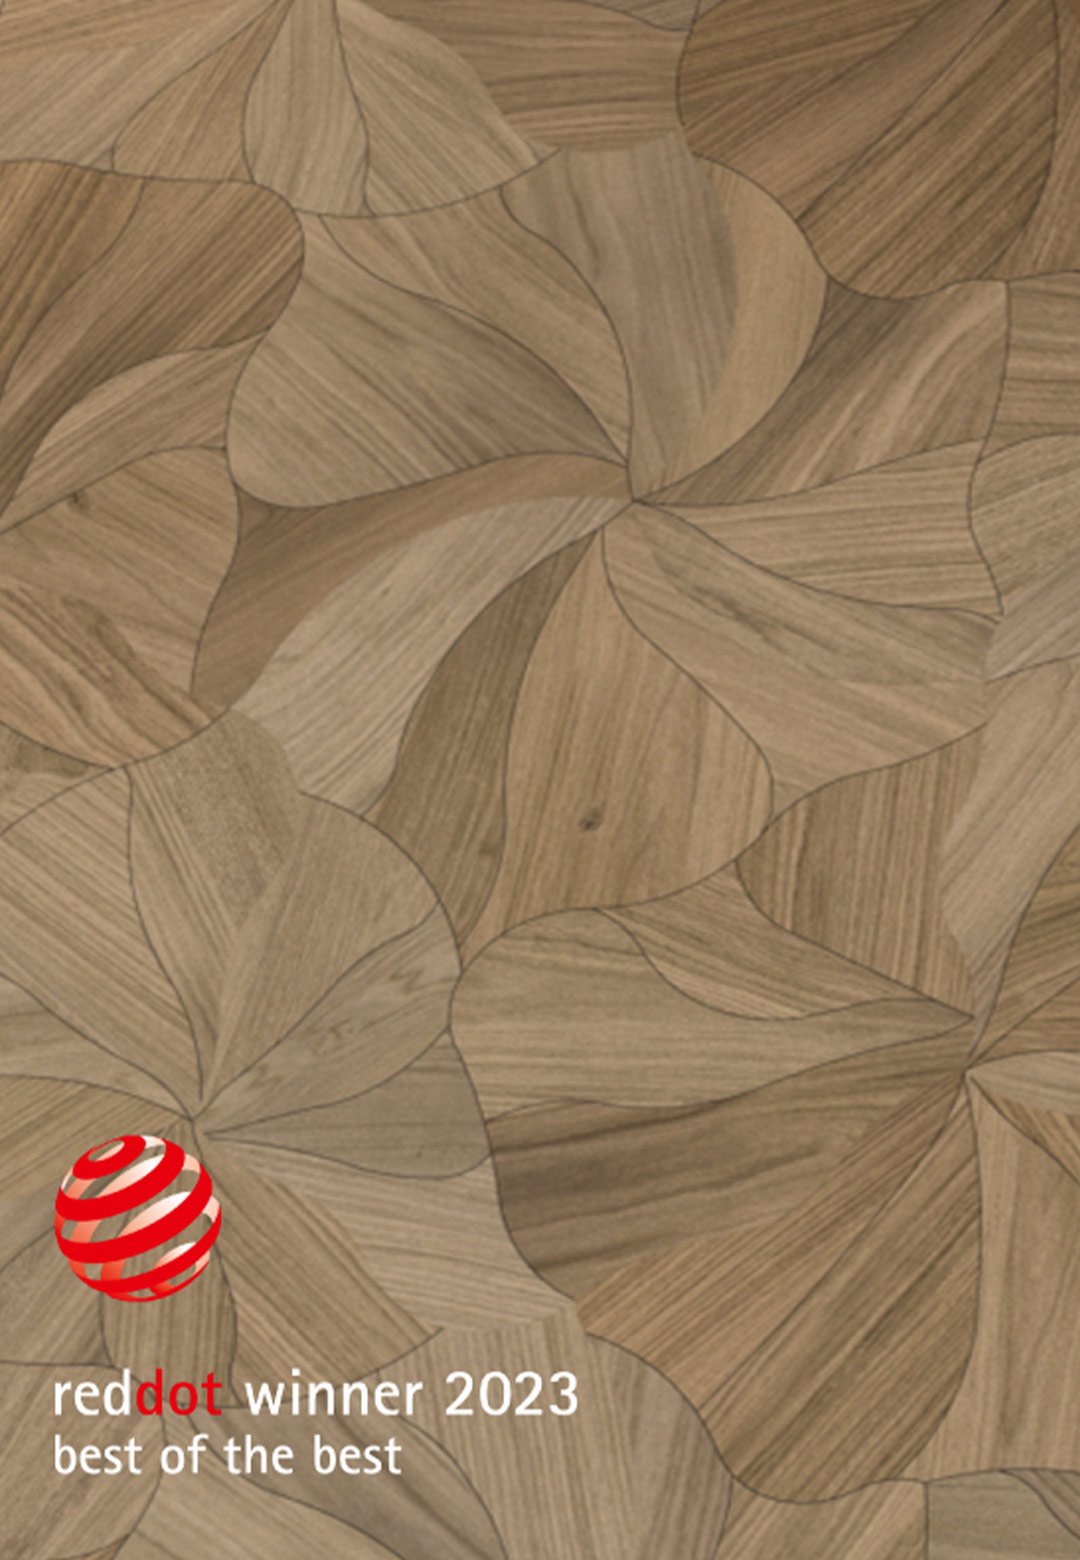 Giovanni Barbieri’s ‘Blooming’ weaves artistry and durability in a wooden floor design